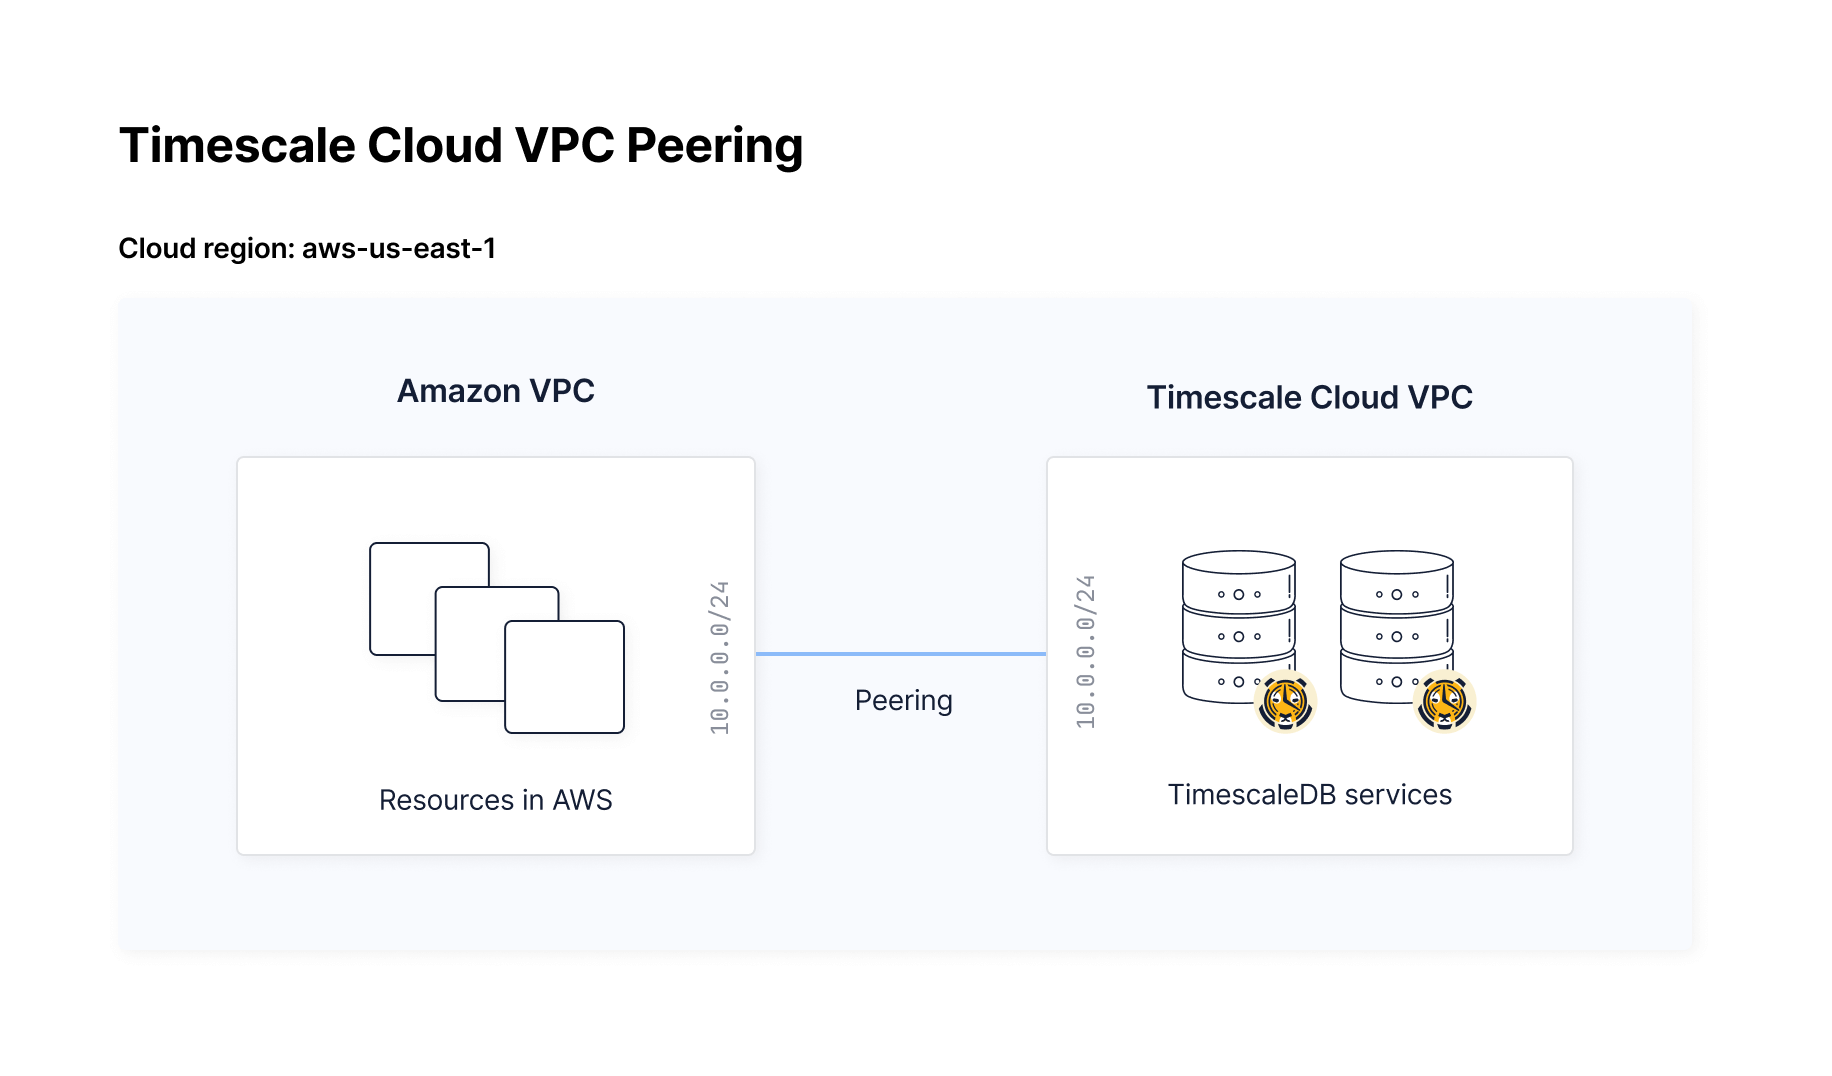 Architecture diagram showing the peering connection between an Amazon VPC and Timescale Cloud VPC